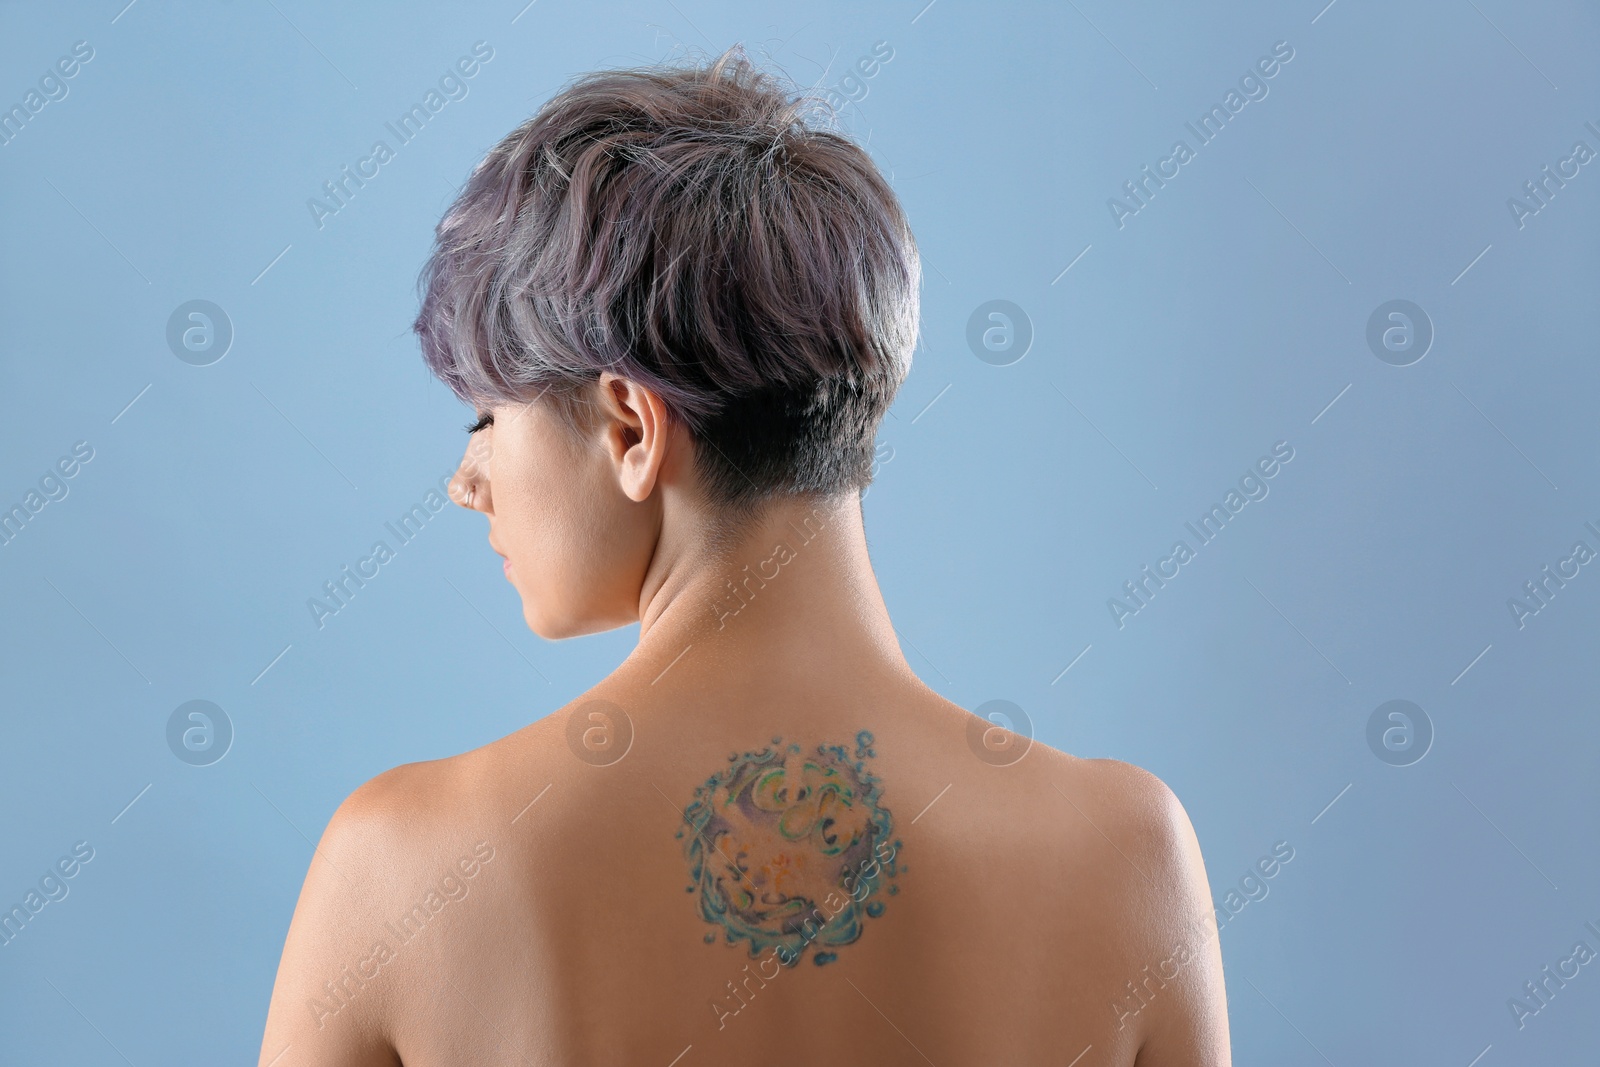 Photo of Beautiful tattoo on female back against color background